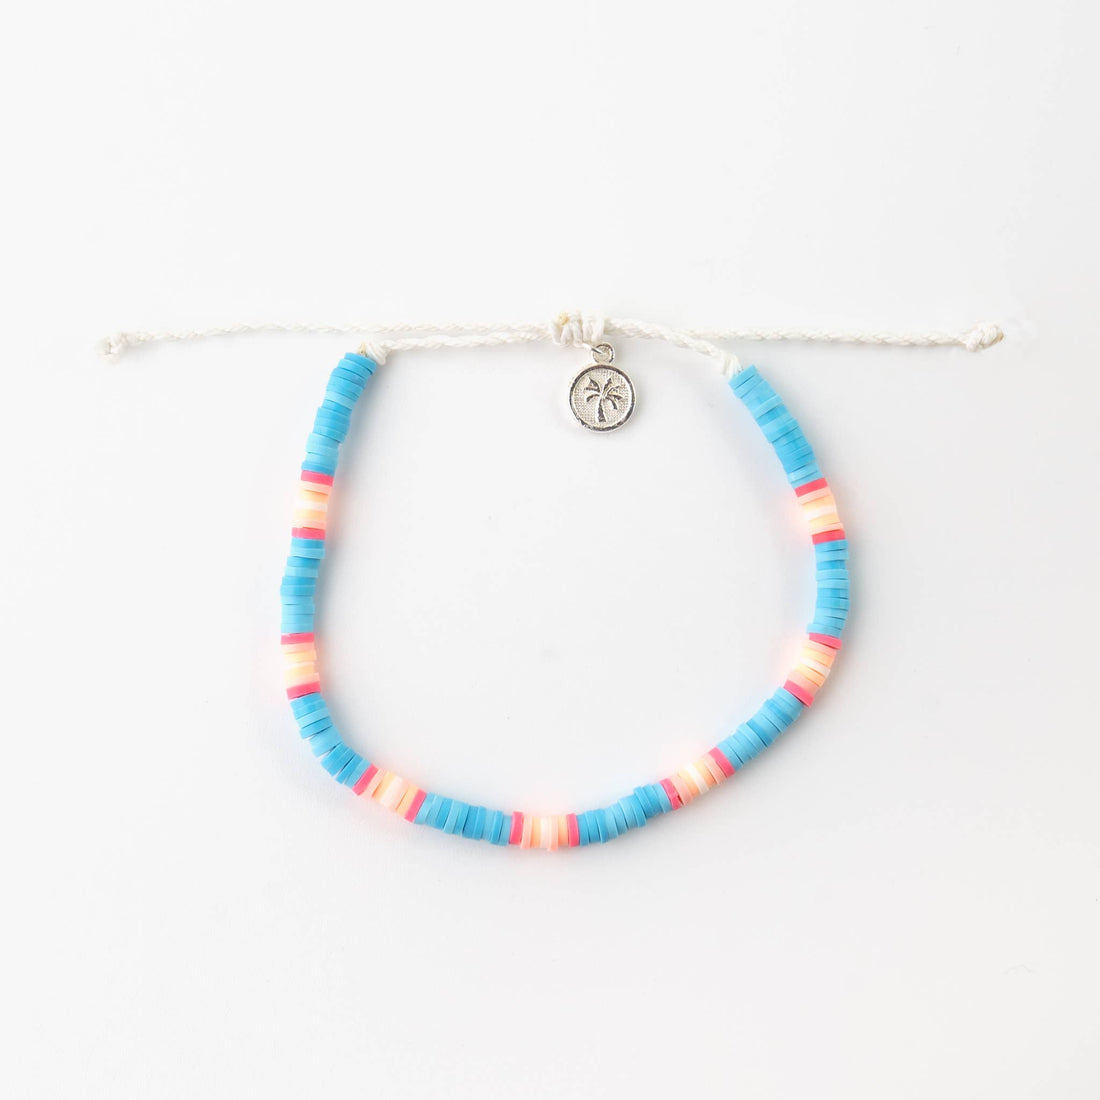 Blue and White Clay Bead Bracelet